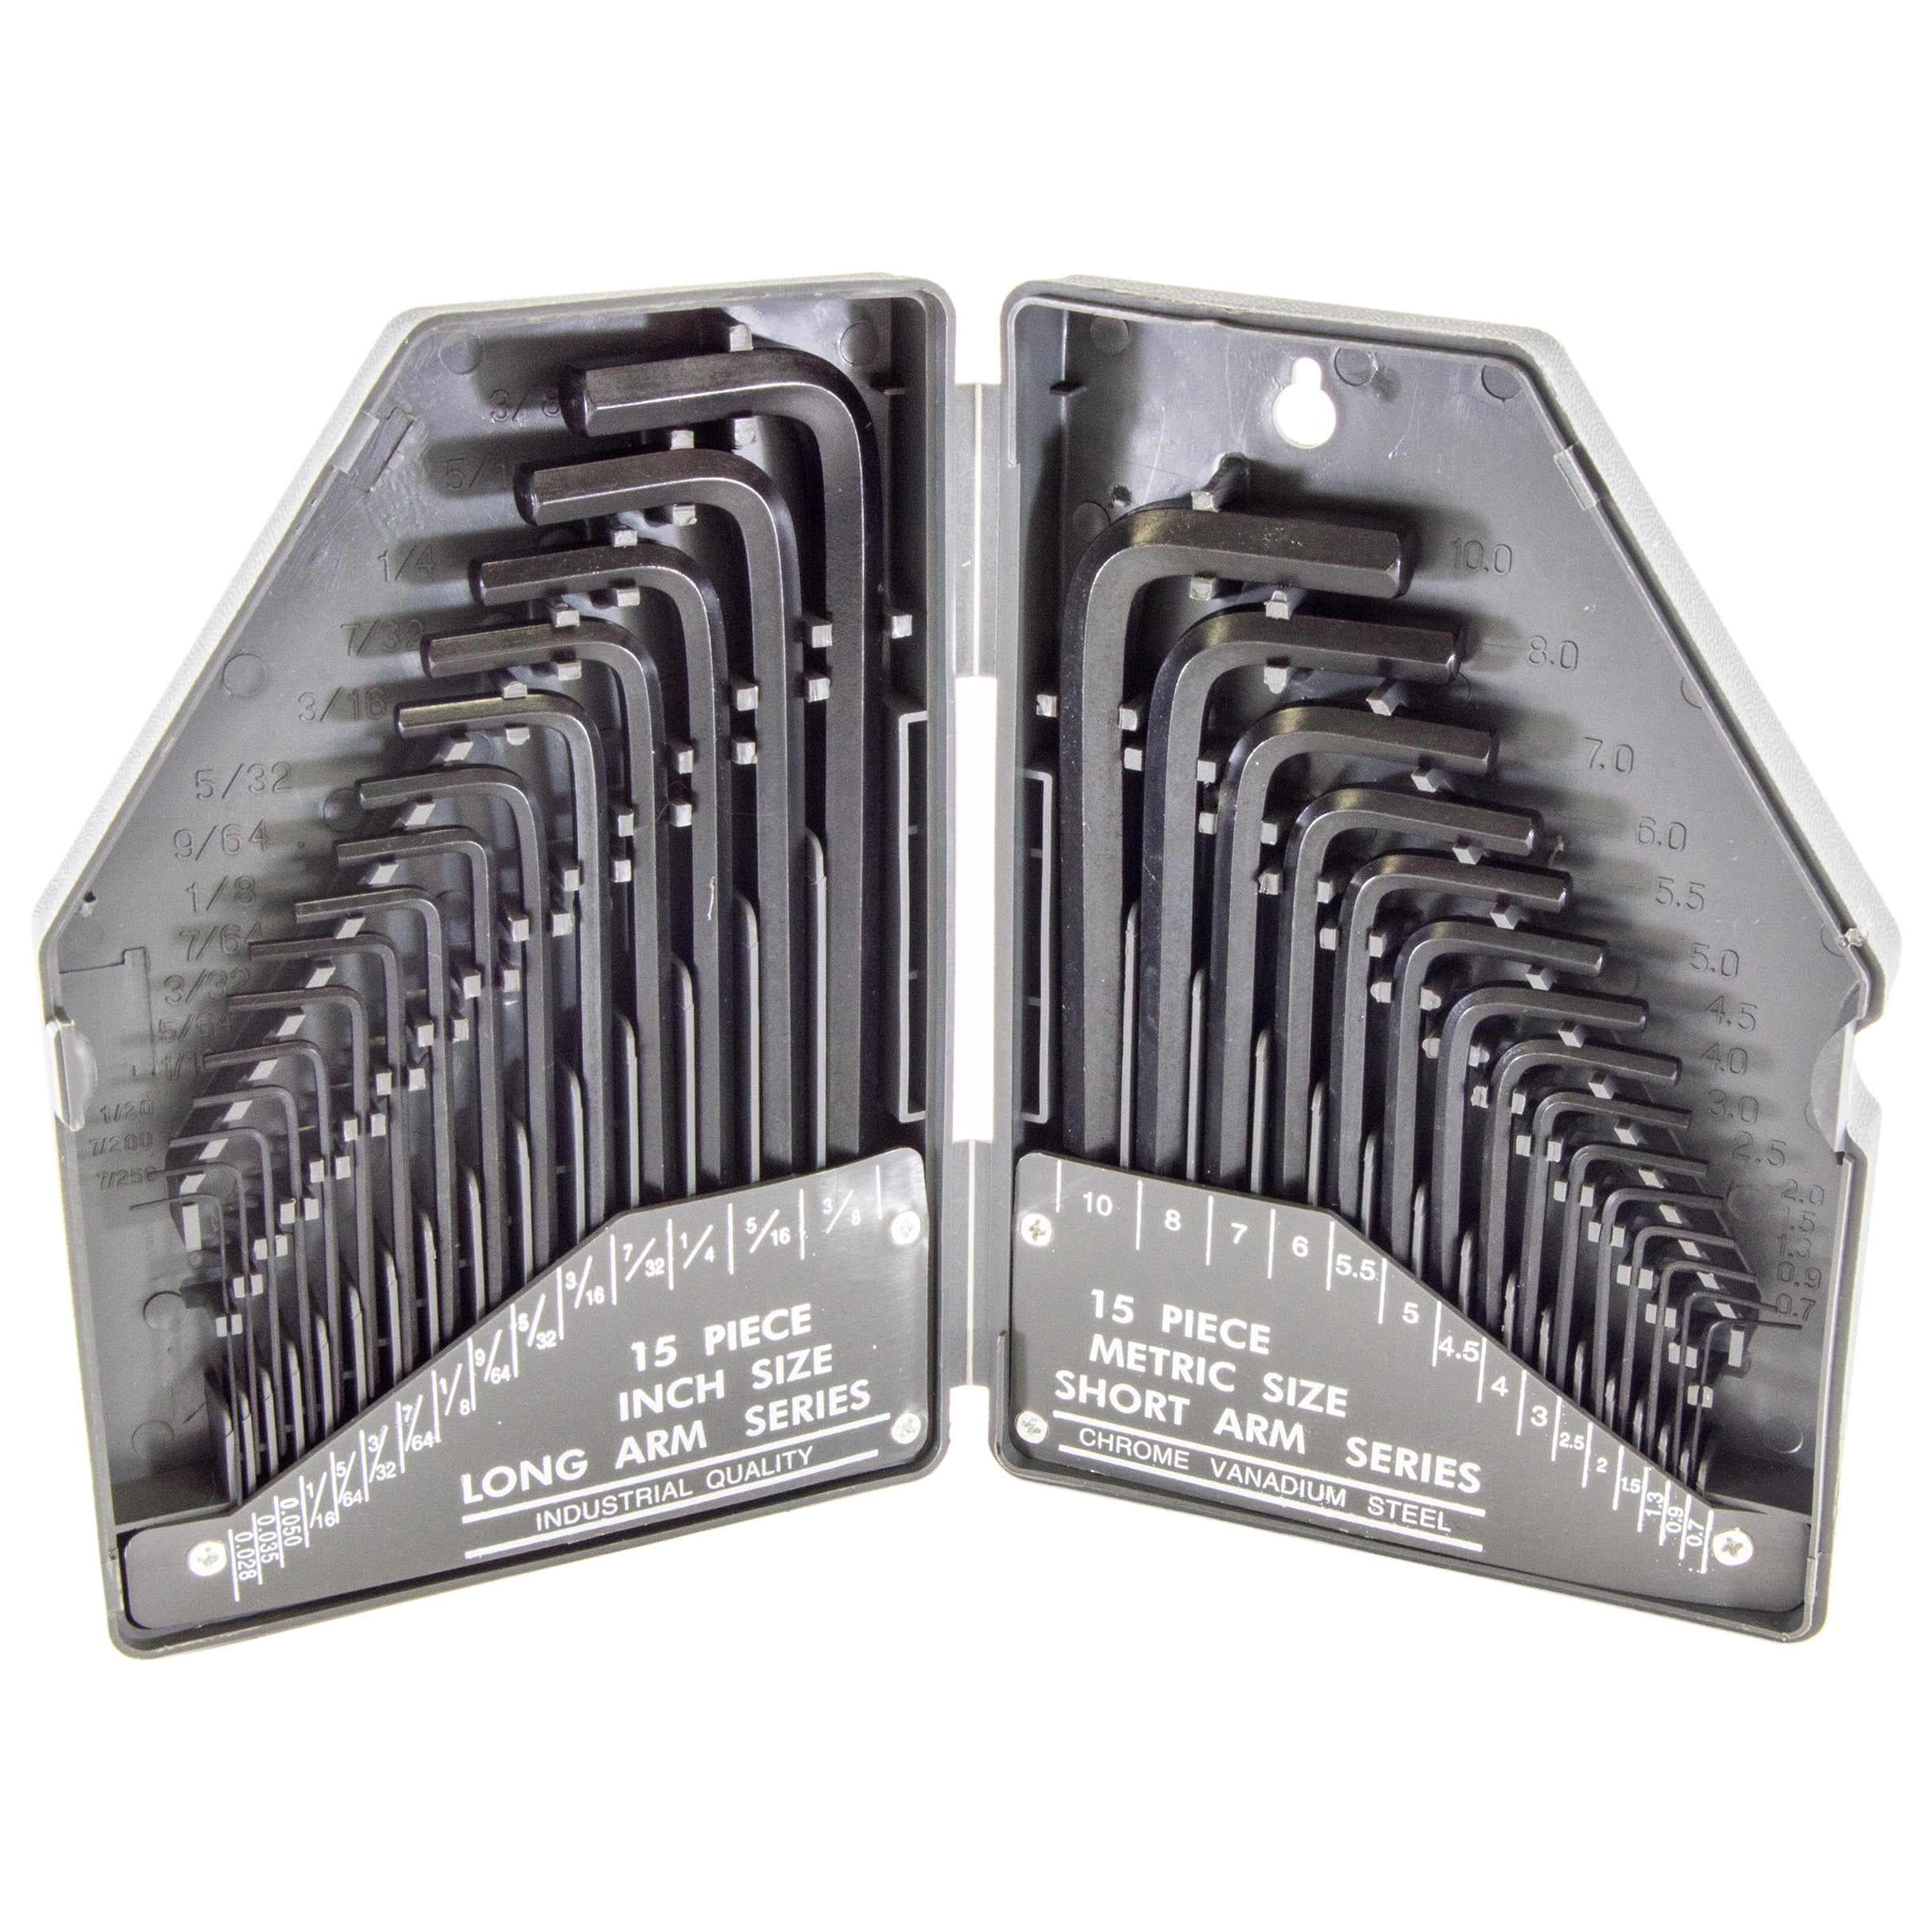 30 Piece Hex Allen Wrench Set, Includes Popular Inches and Metric Sizes